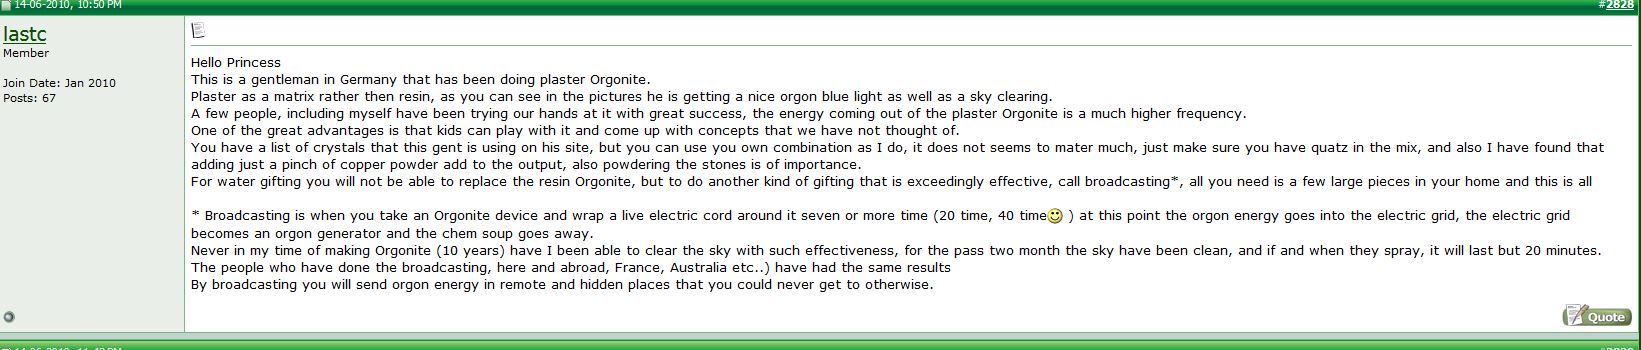 2015-01-03 15_41_48-Orgonite Experiments_ RESULTS! - Page 142 - David Icke's Official Forums.jpg